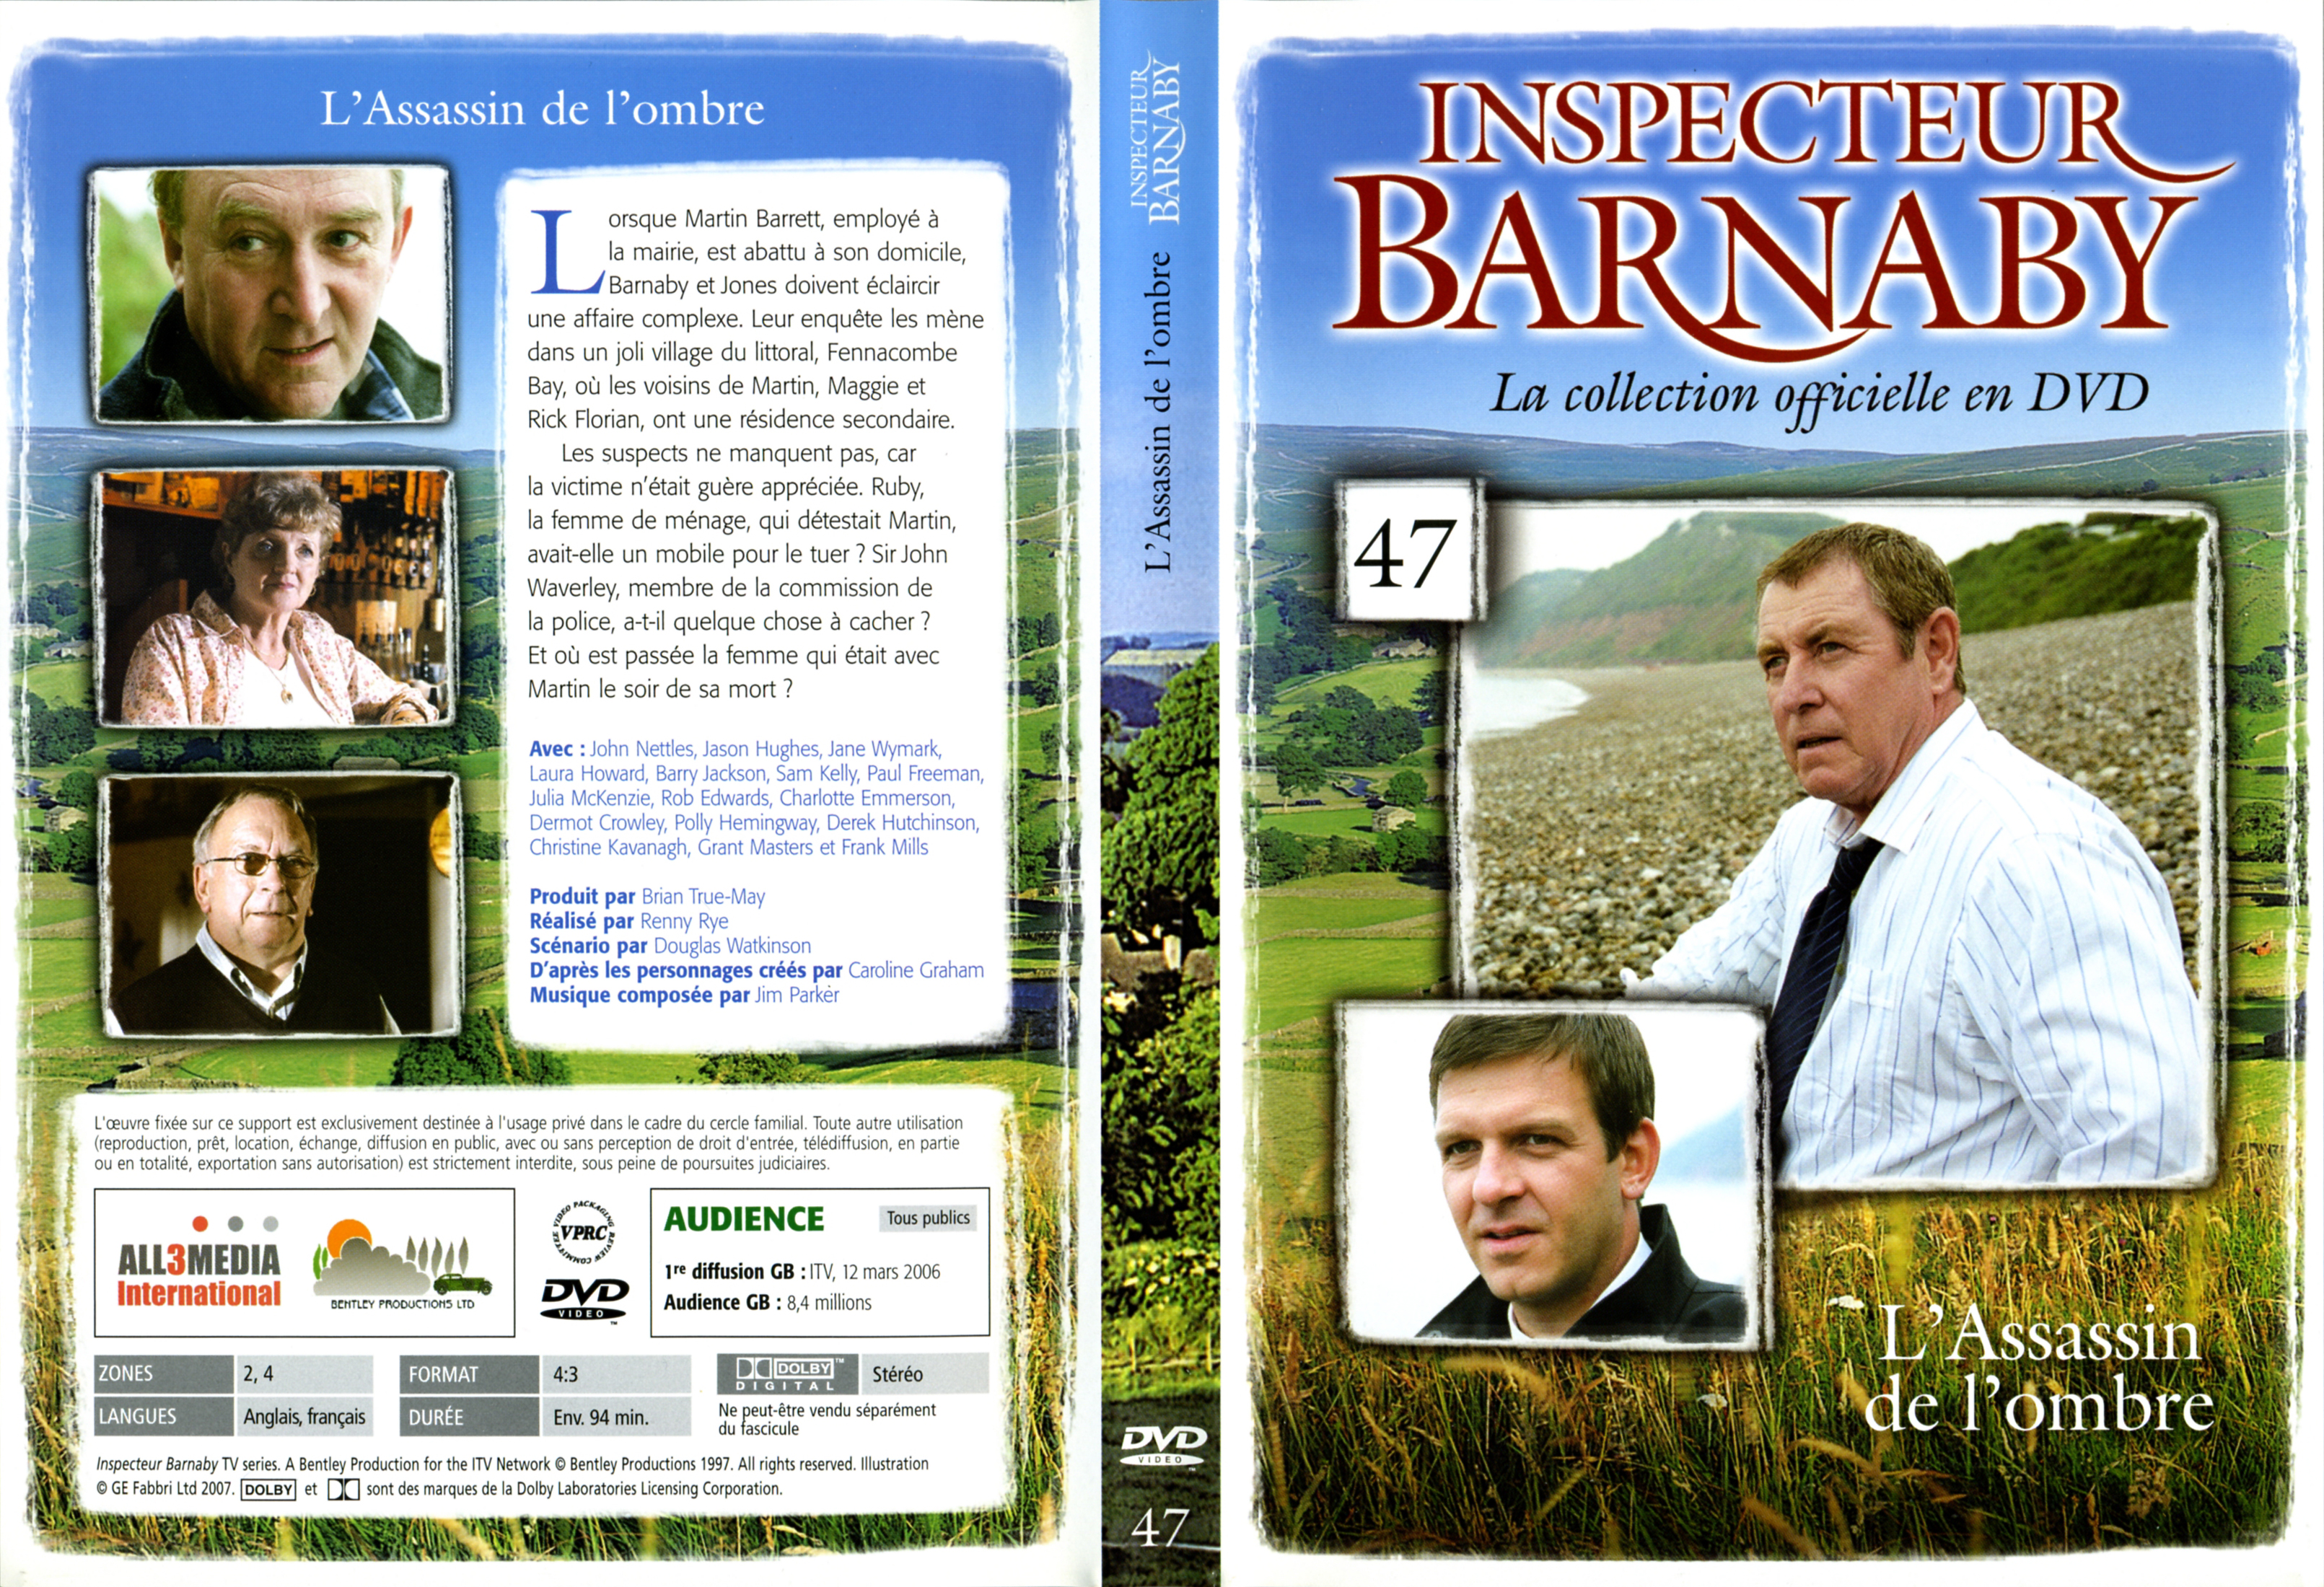 Jaquette DVD Barnaby vol 47 - L